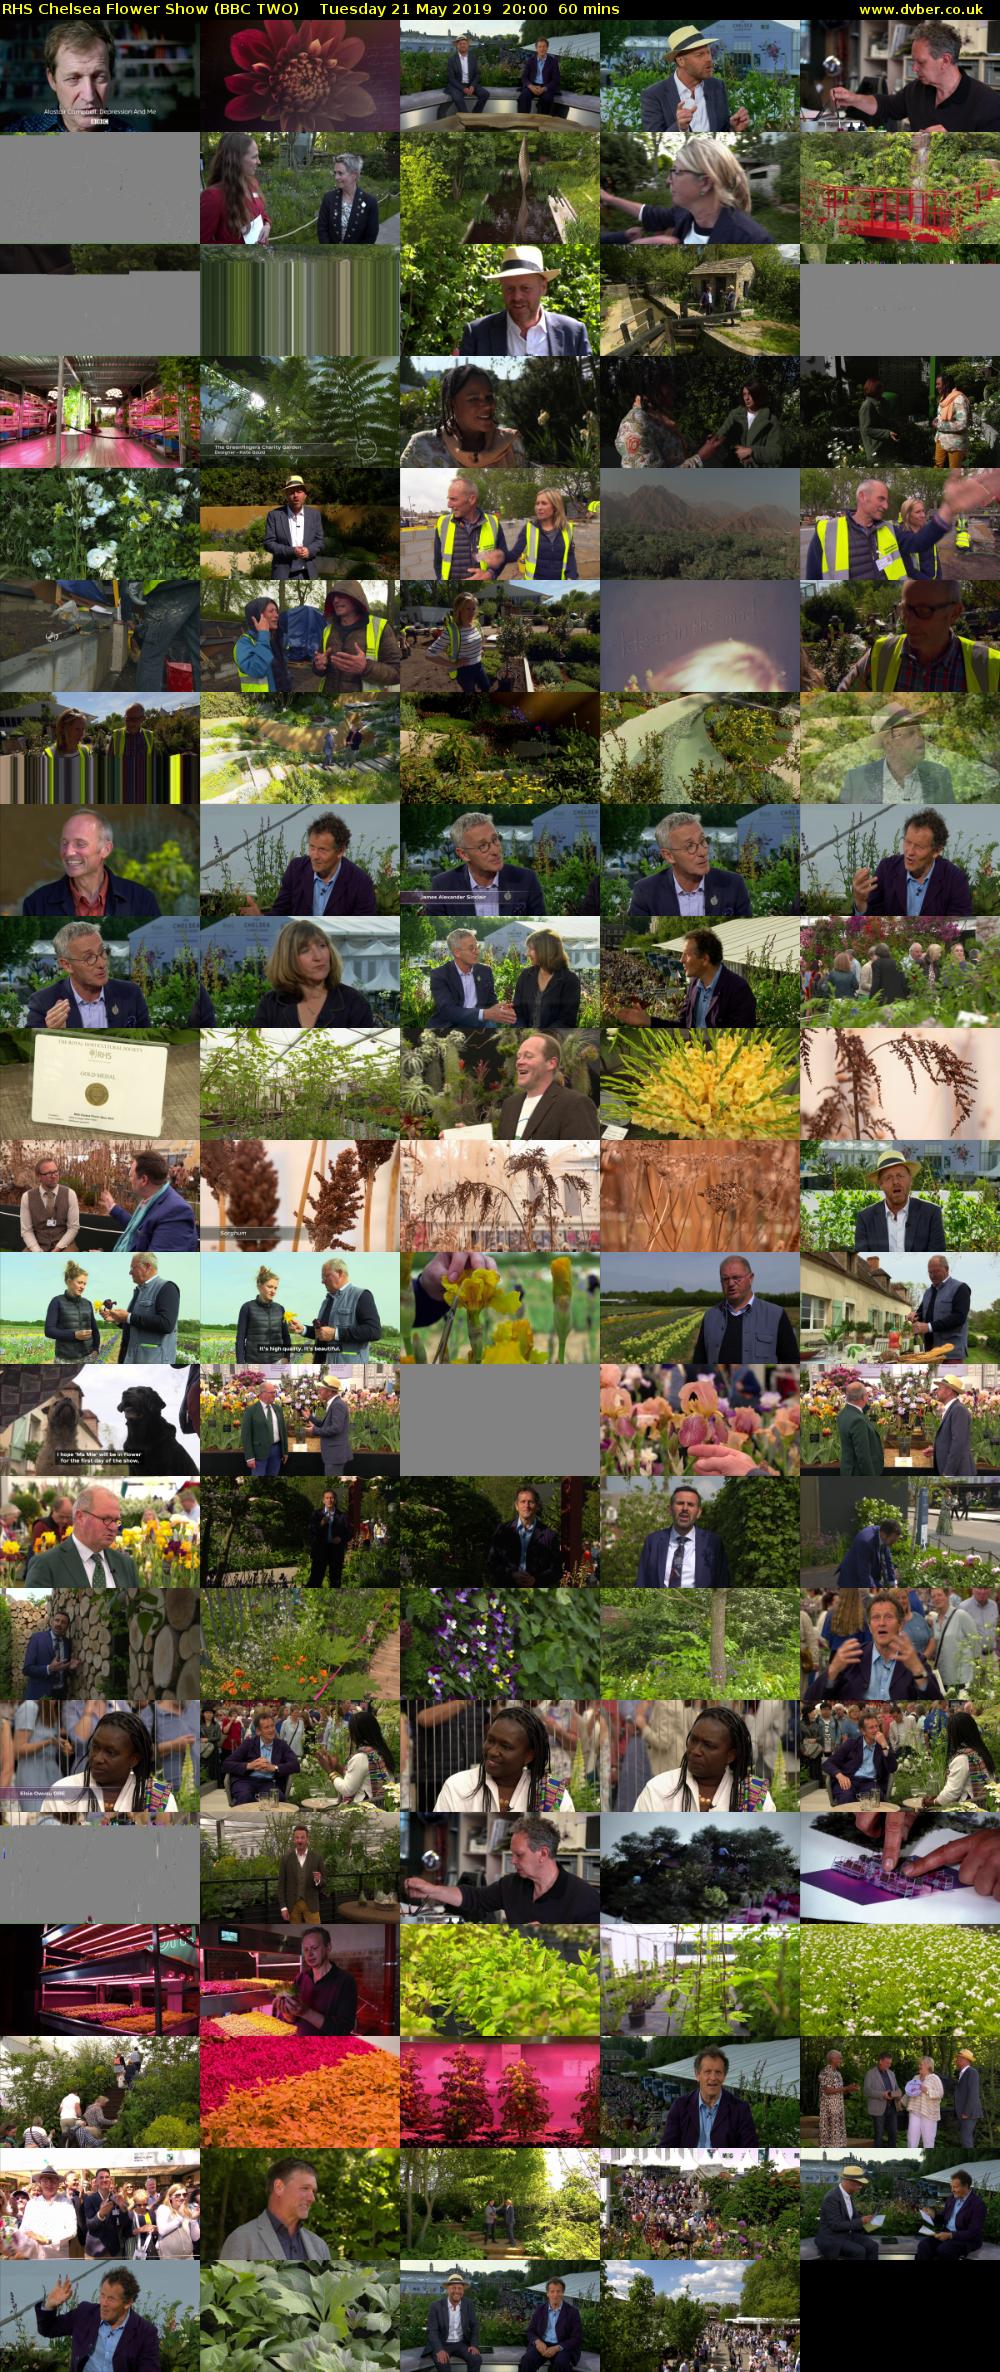 RHS Chelsea Flower Show (BBC TWO) Tuesday 21 May 2019 20:00 - 21:00